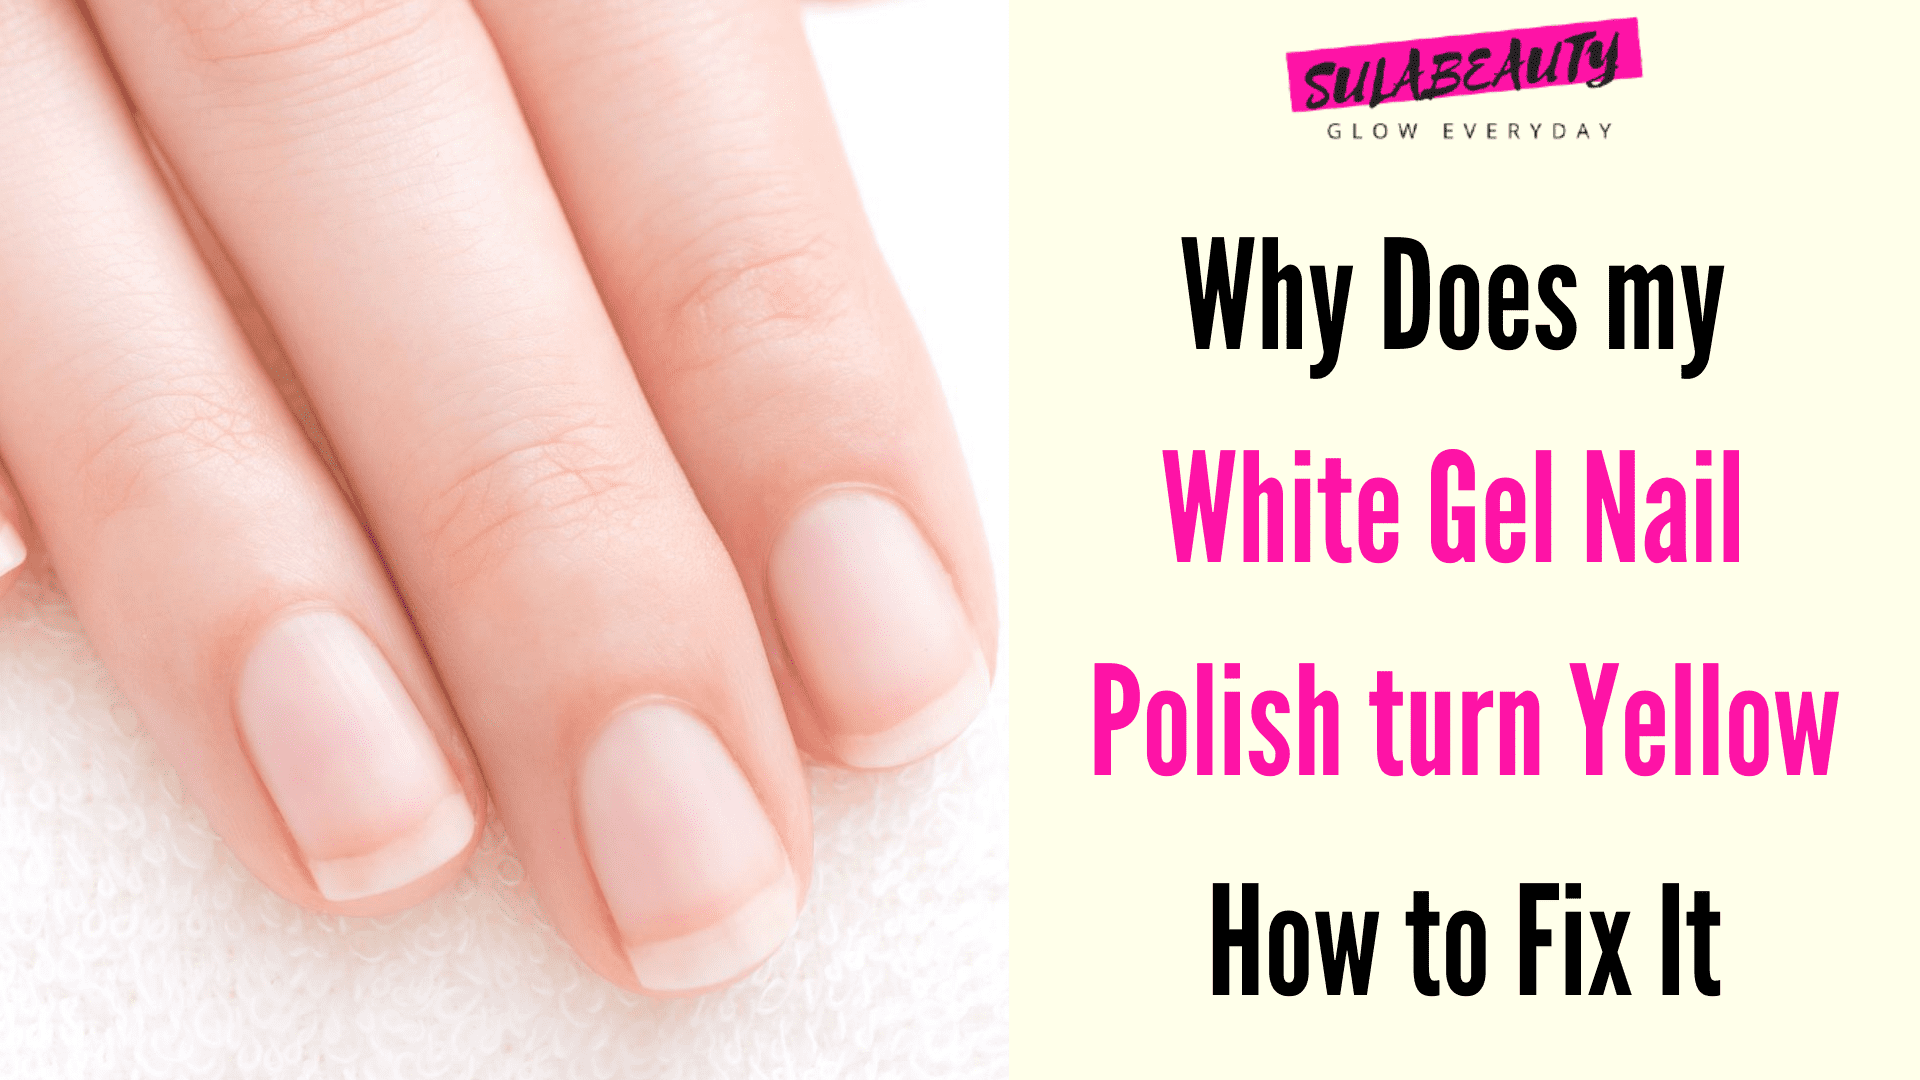 Why Does my White Gel Nail Polish turn Yellow? How to Fix It! - Sula Beauty